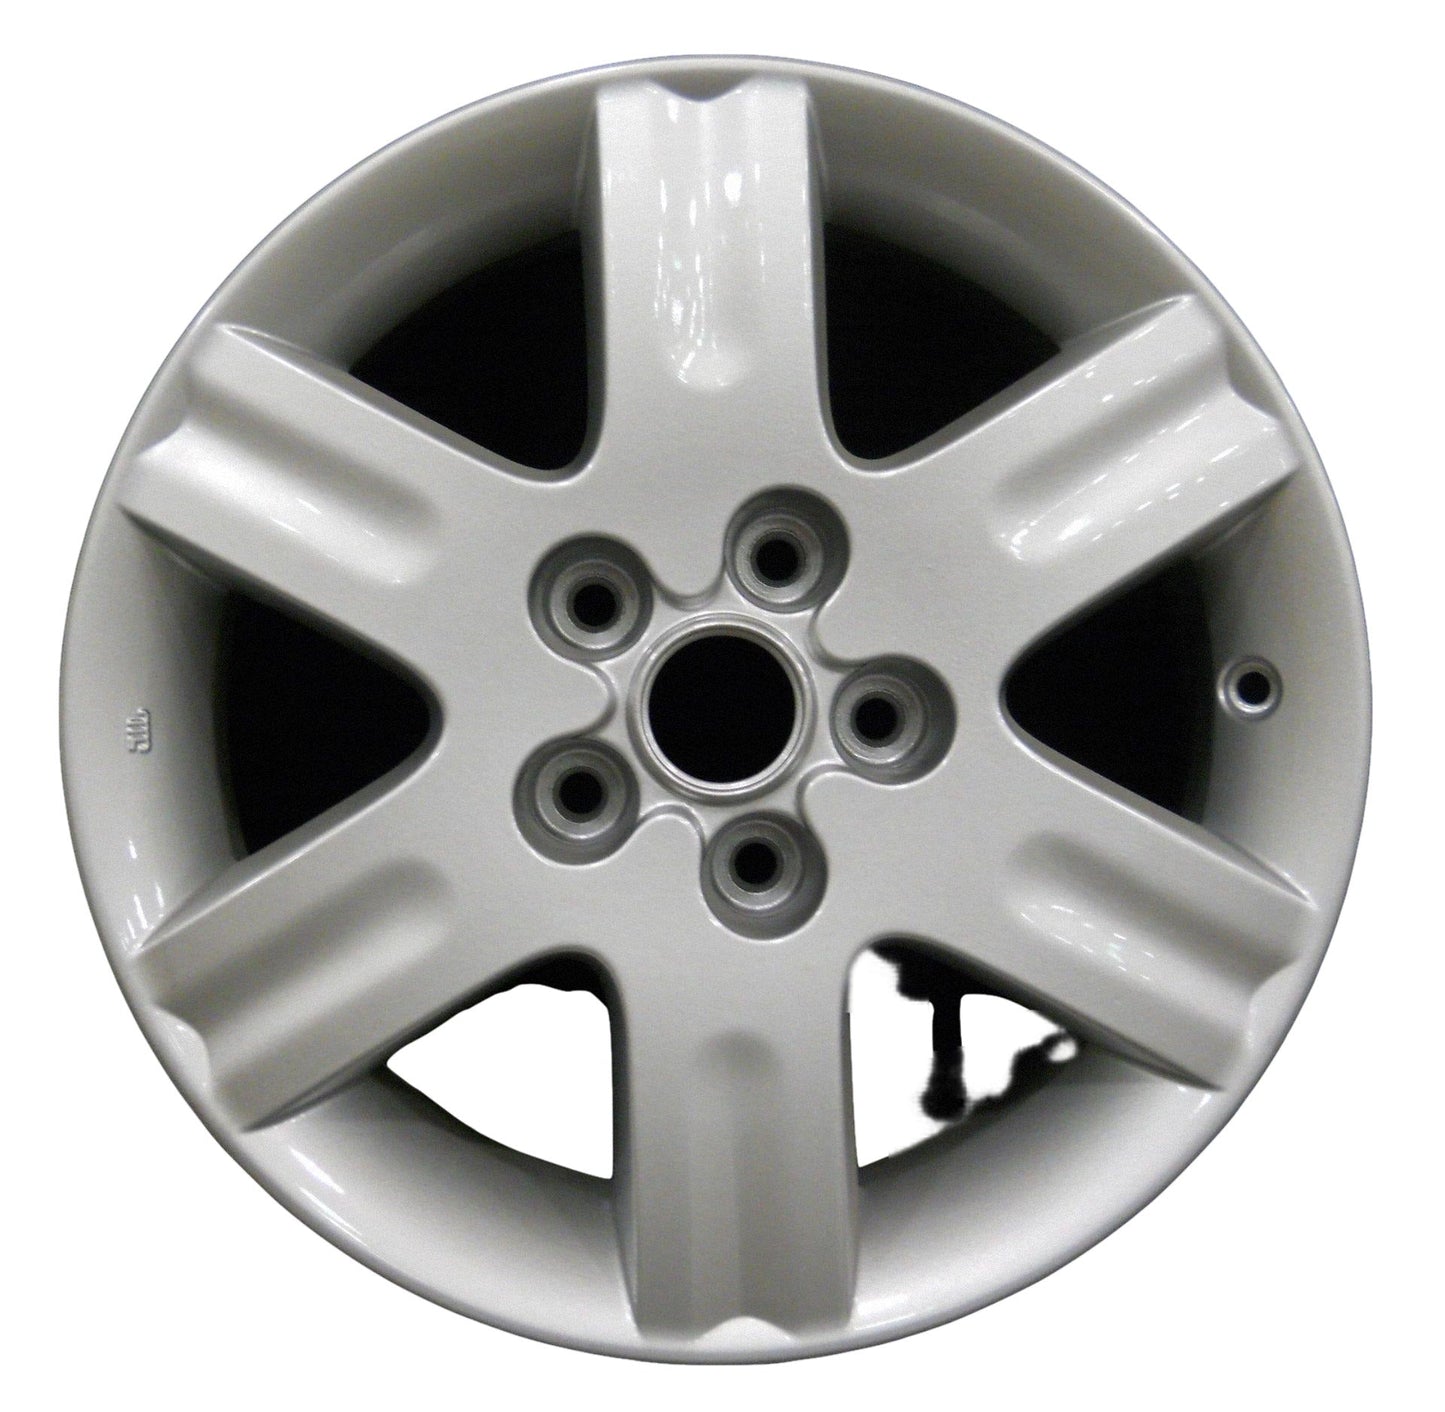 Nissan Quest  2004, 2005, 2006 Factory OEM Car Wheel Size 16x6.5 Alloy WAO.62426.PS10.FF